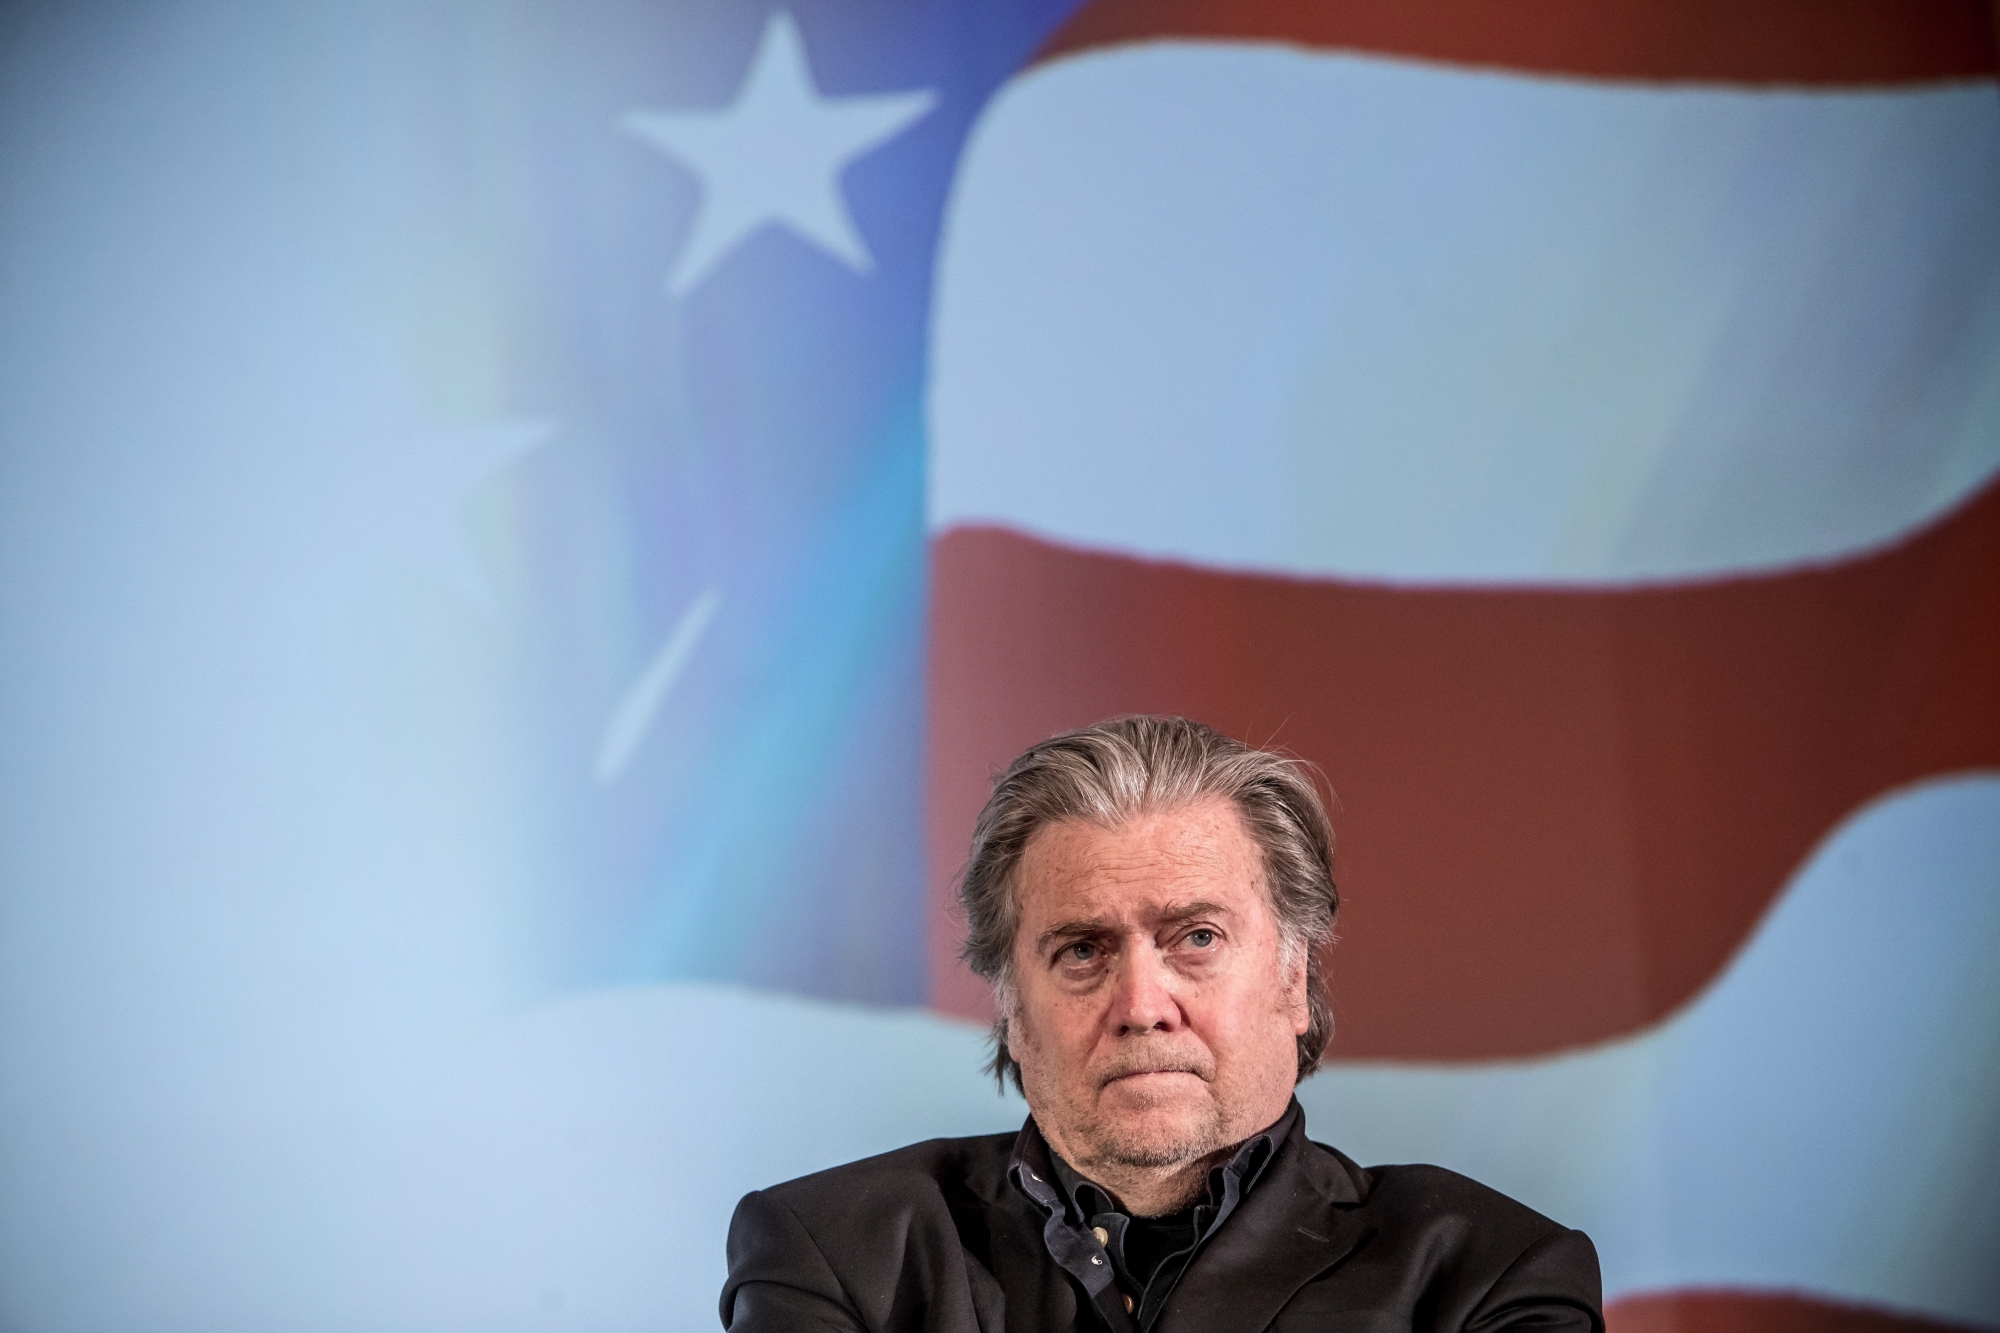 epa08614643 (FILE) - Former Trump political strategist Steve Bannon attends a discussion meeting in Prague, Czech Republic, 22 May 2018 (reissued 20 August 2020). Federal prosecutors in New York announced that Steve Bannon and three other former members of the Trump campaign have been arrested and indicted for fraud in connection with a fundraising scheme.  EPA/MARTIN DIVISEK ArcInfo